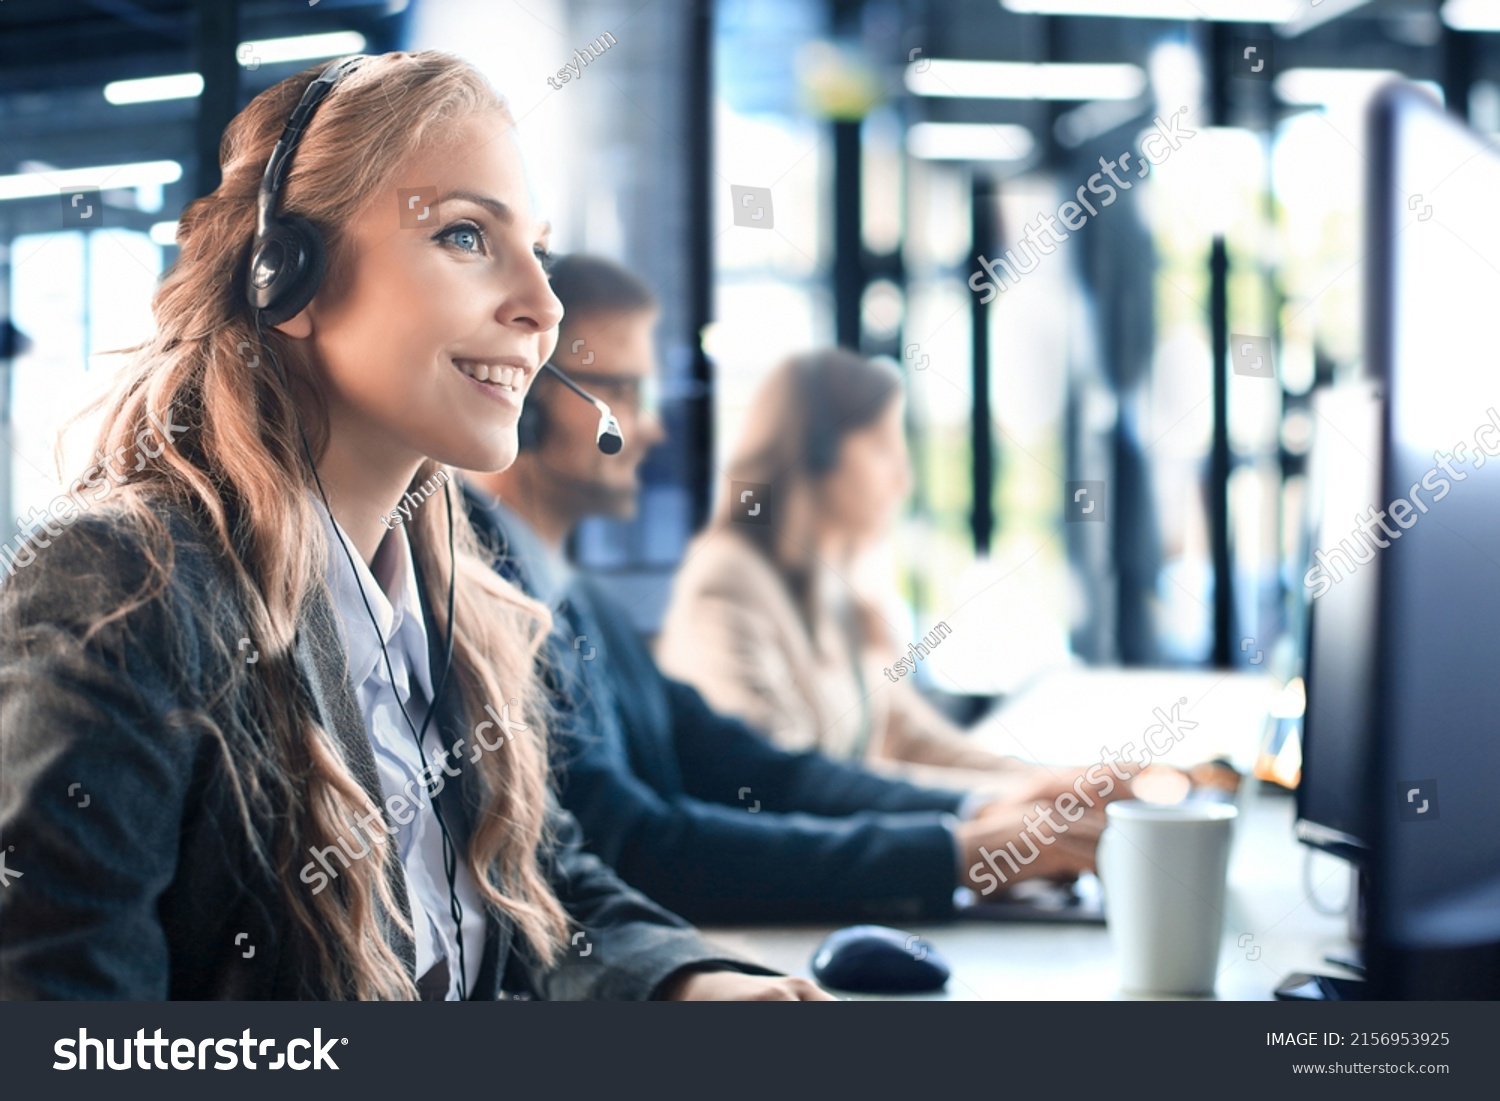 Female customer support operator with headset and smiling, with collegues at background. #2156953925